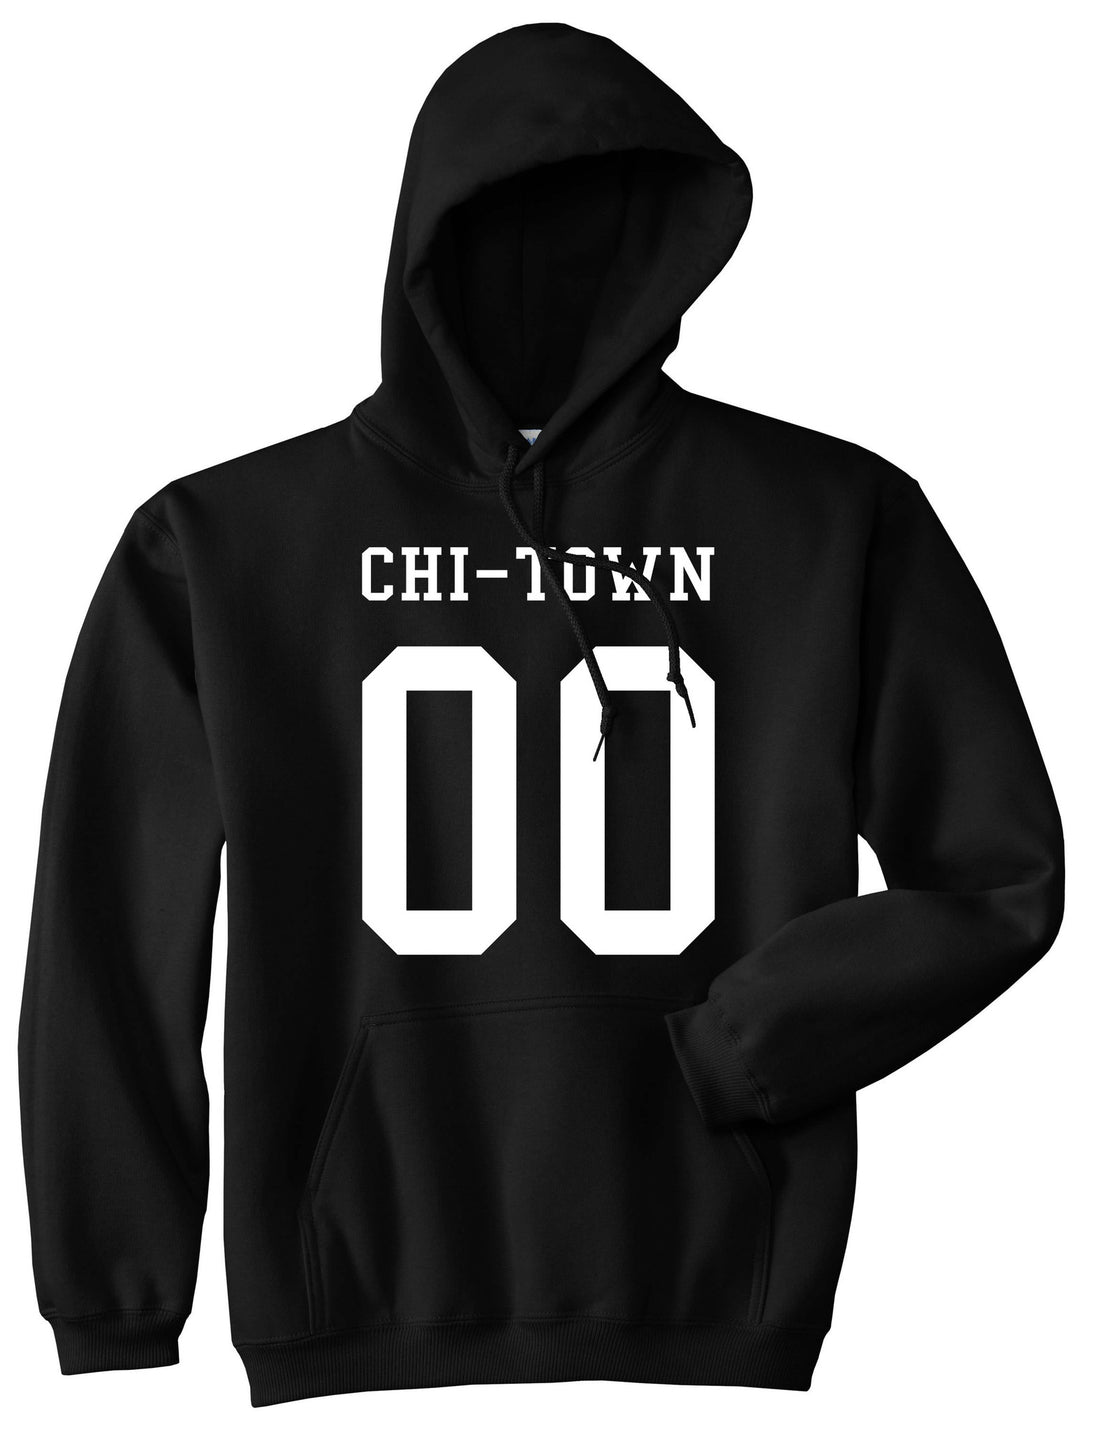 Chitown Team 00 Chicago Jersey Boys Kids Pullover Hoodie Hoody in Black By Kings Of NY